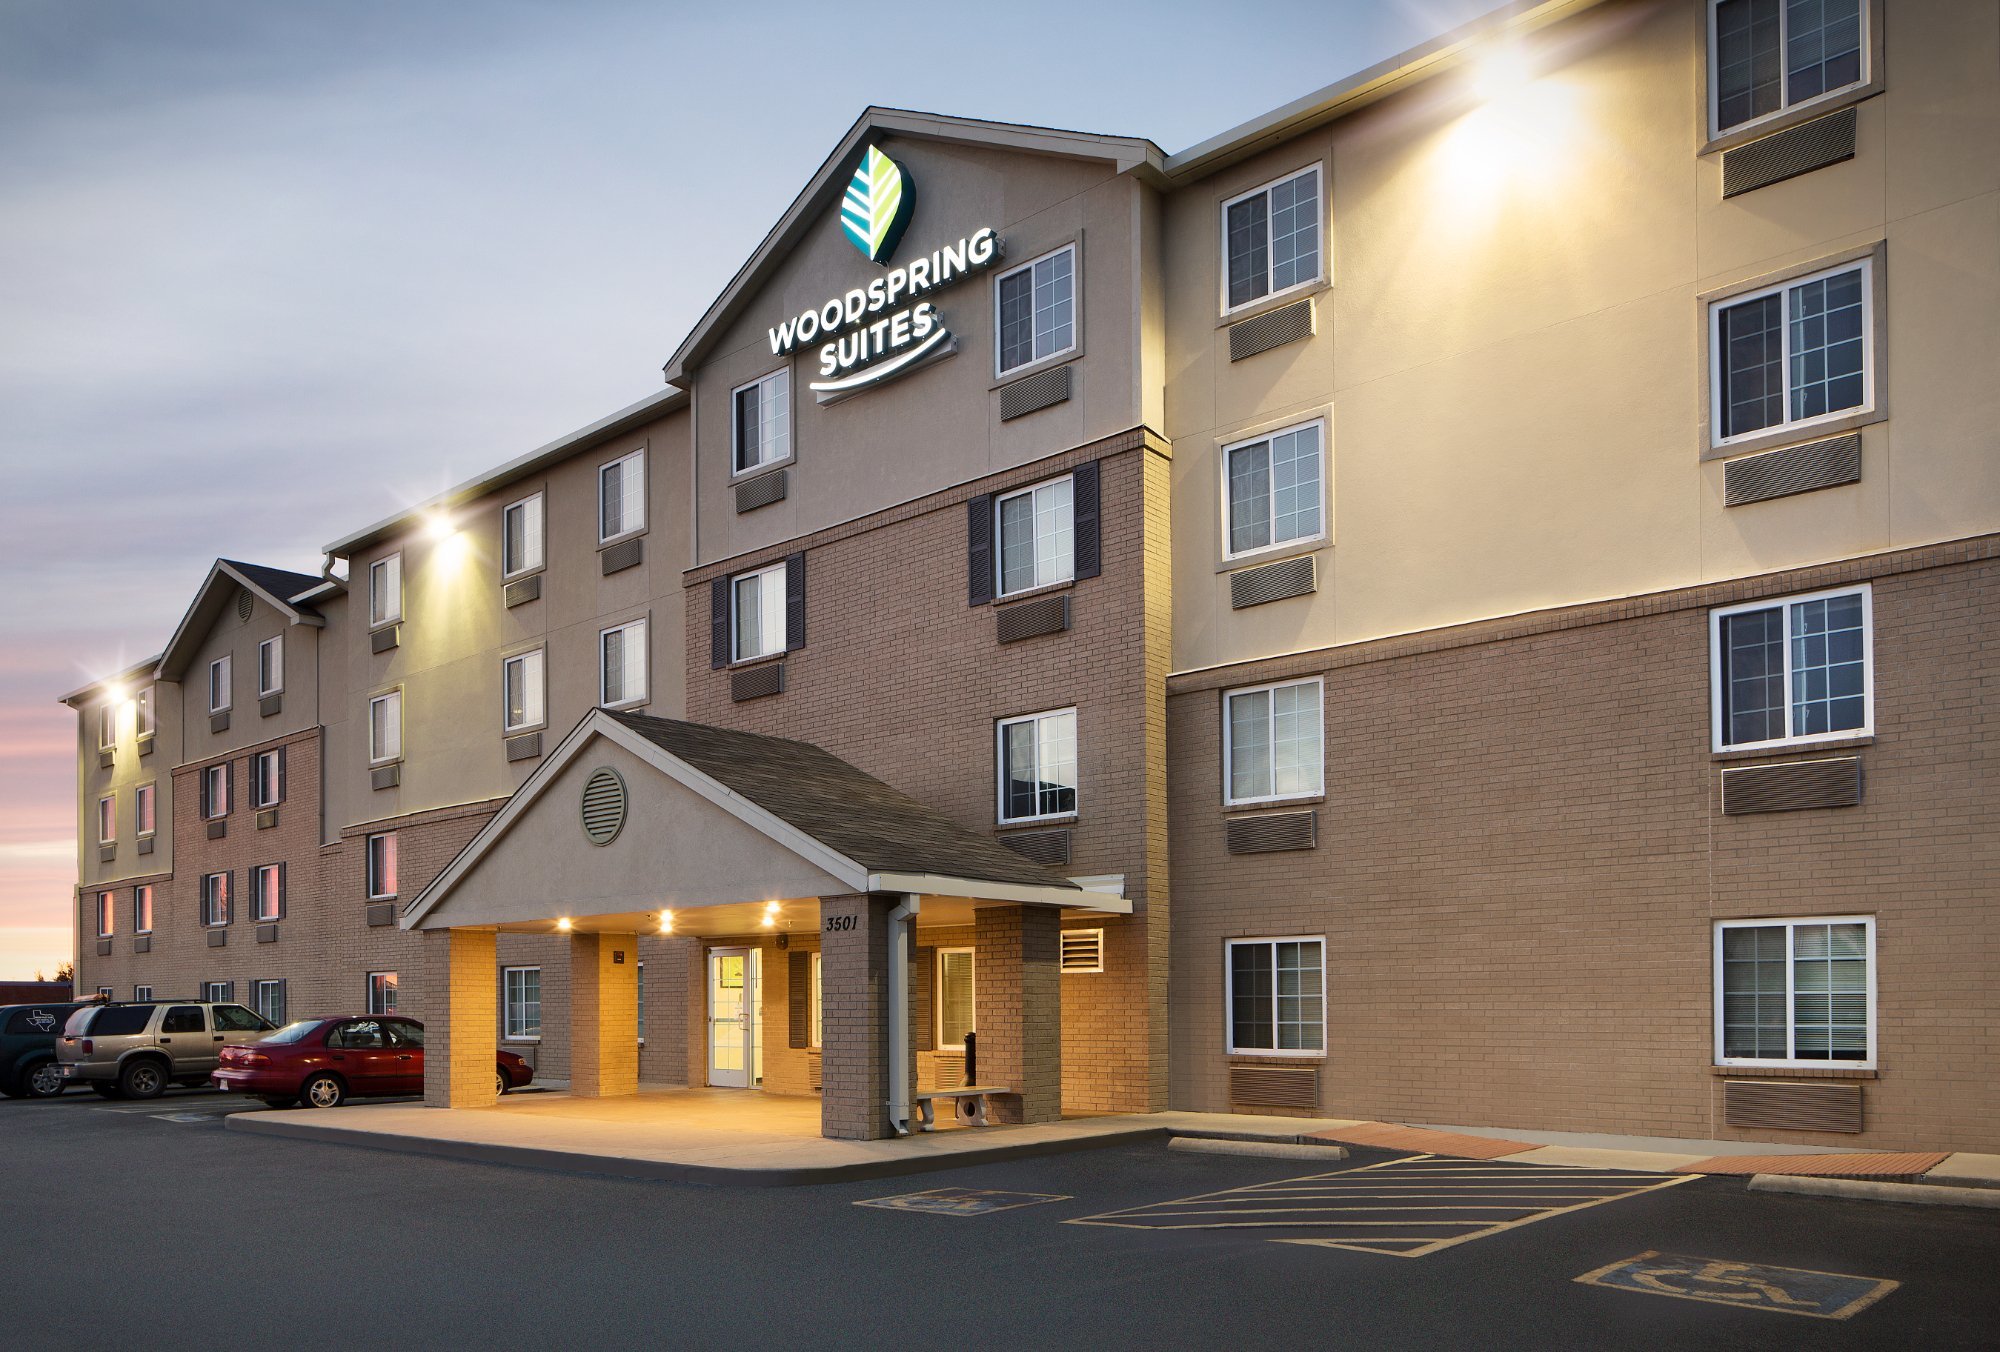 Photo of WoodSpring Suites Fort Worth Fossil Creek, Fort Worth, TX